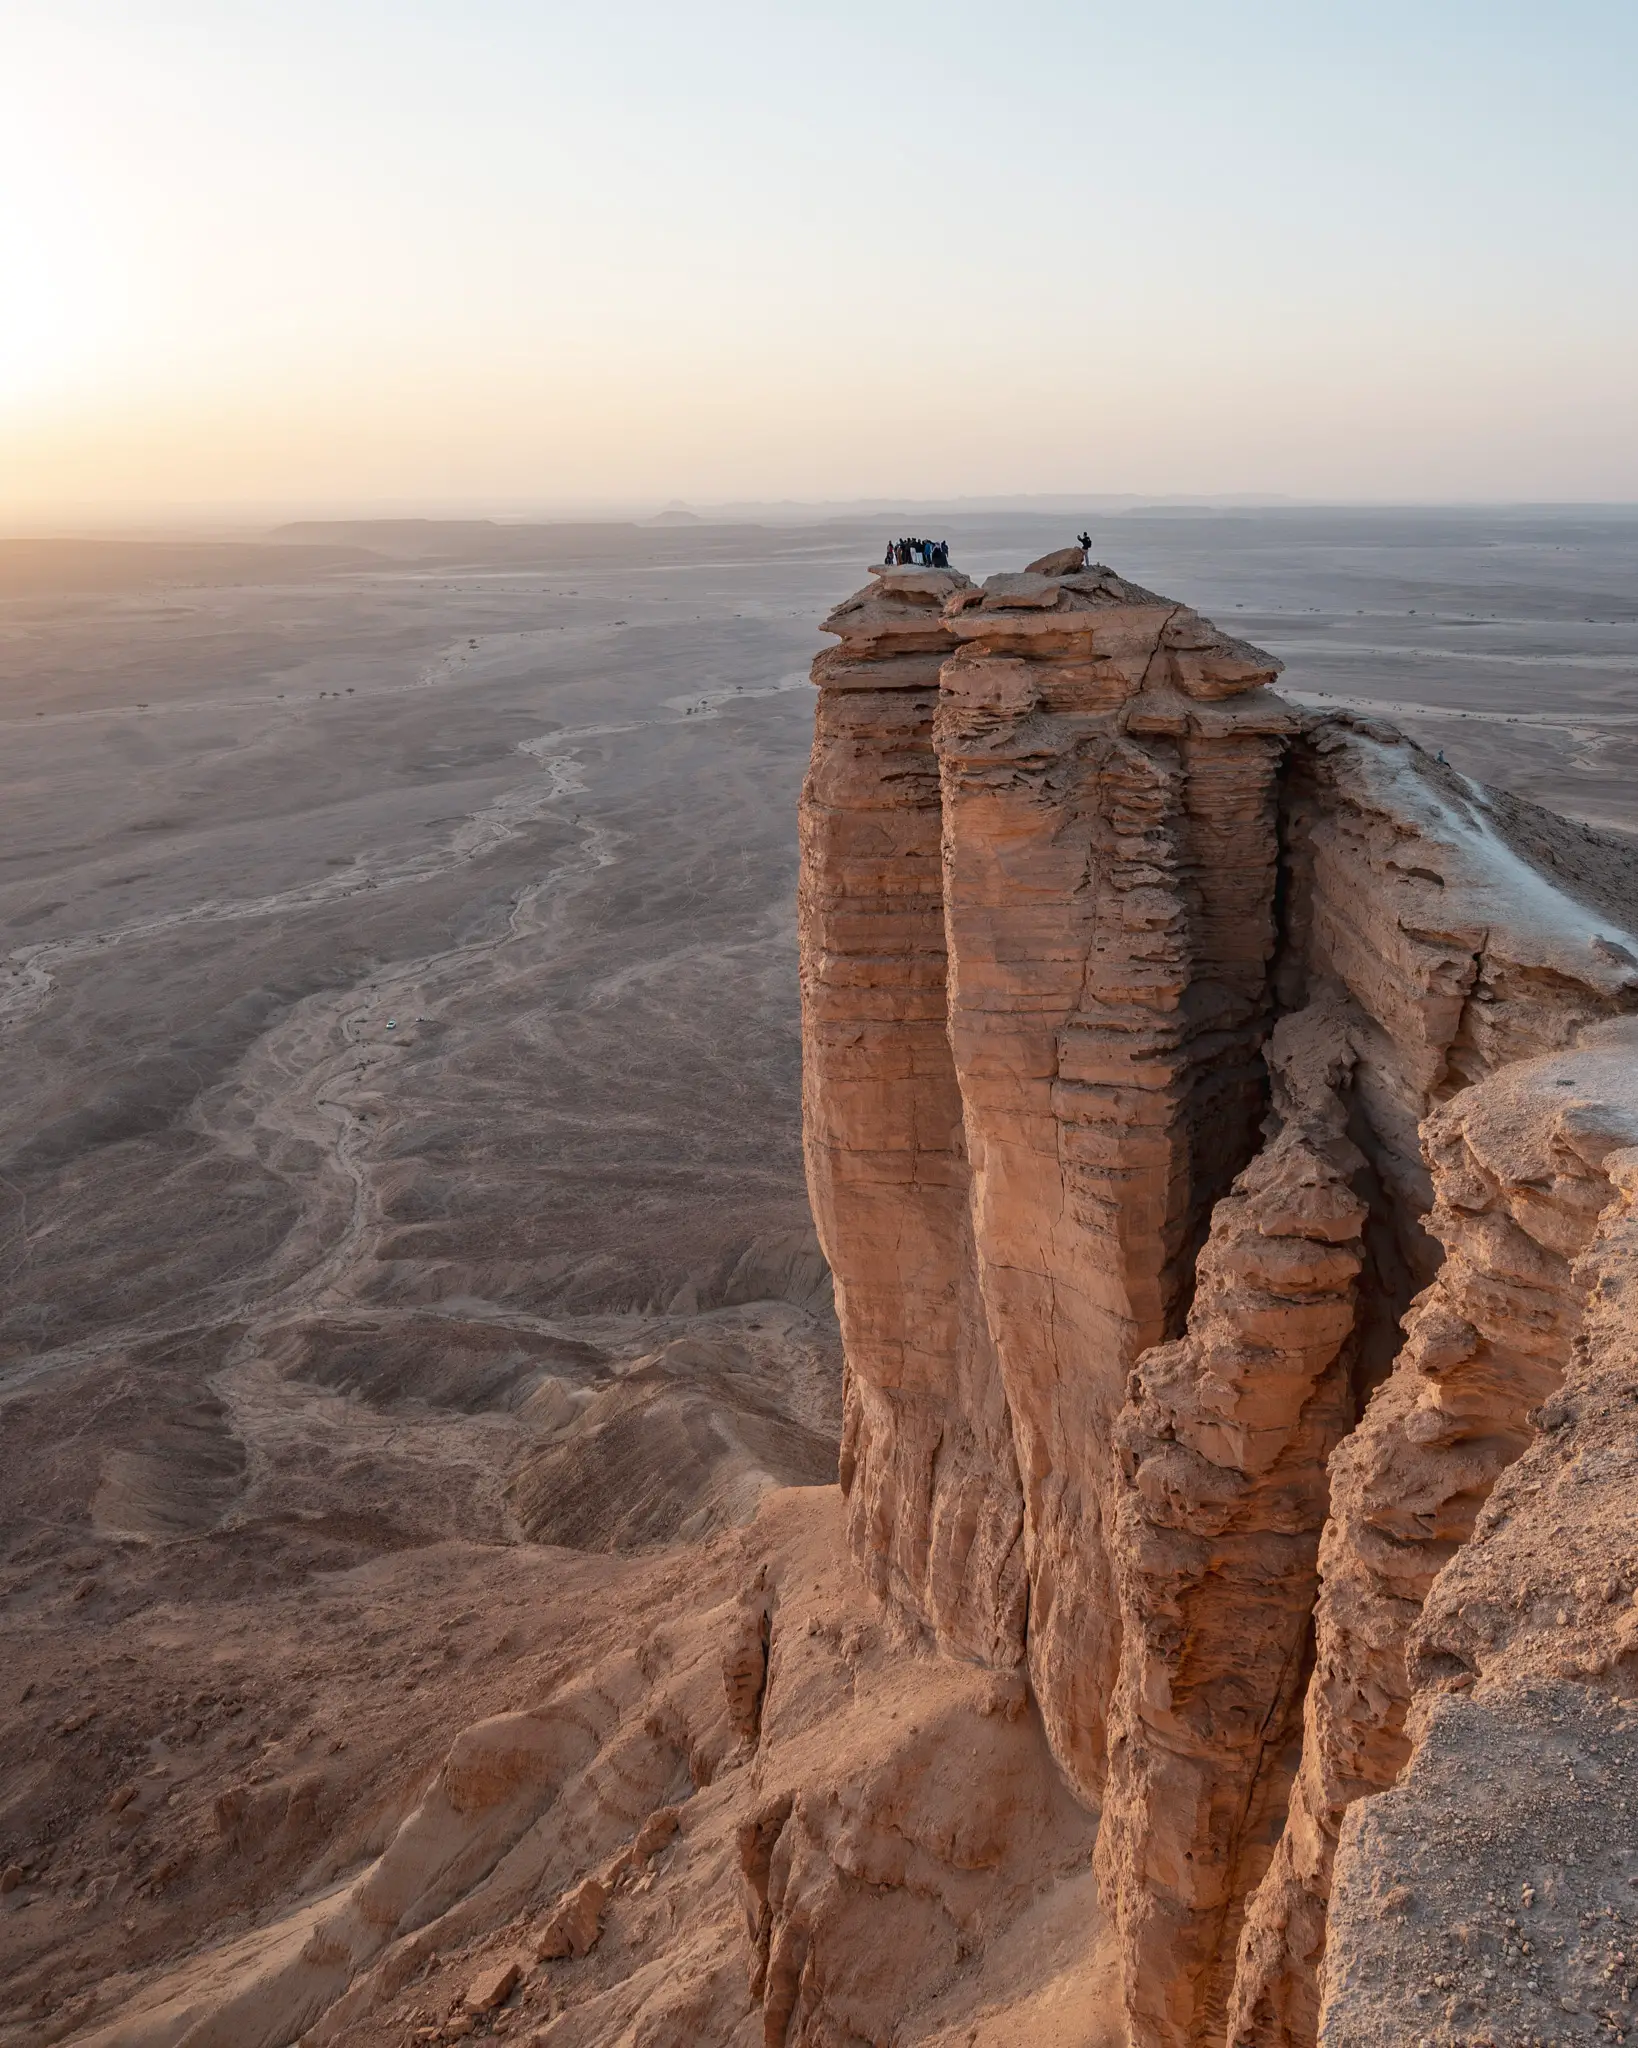 Epic views of the Pillar at the Edge of the World